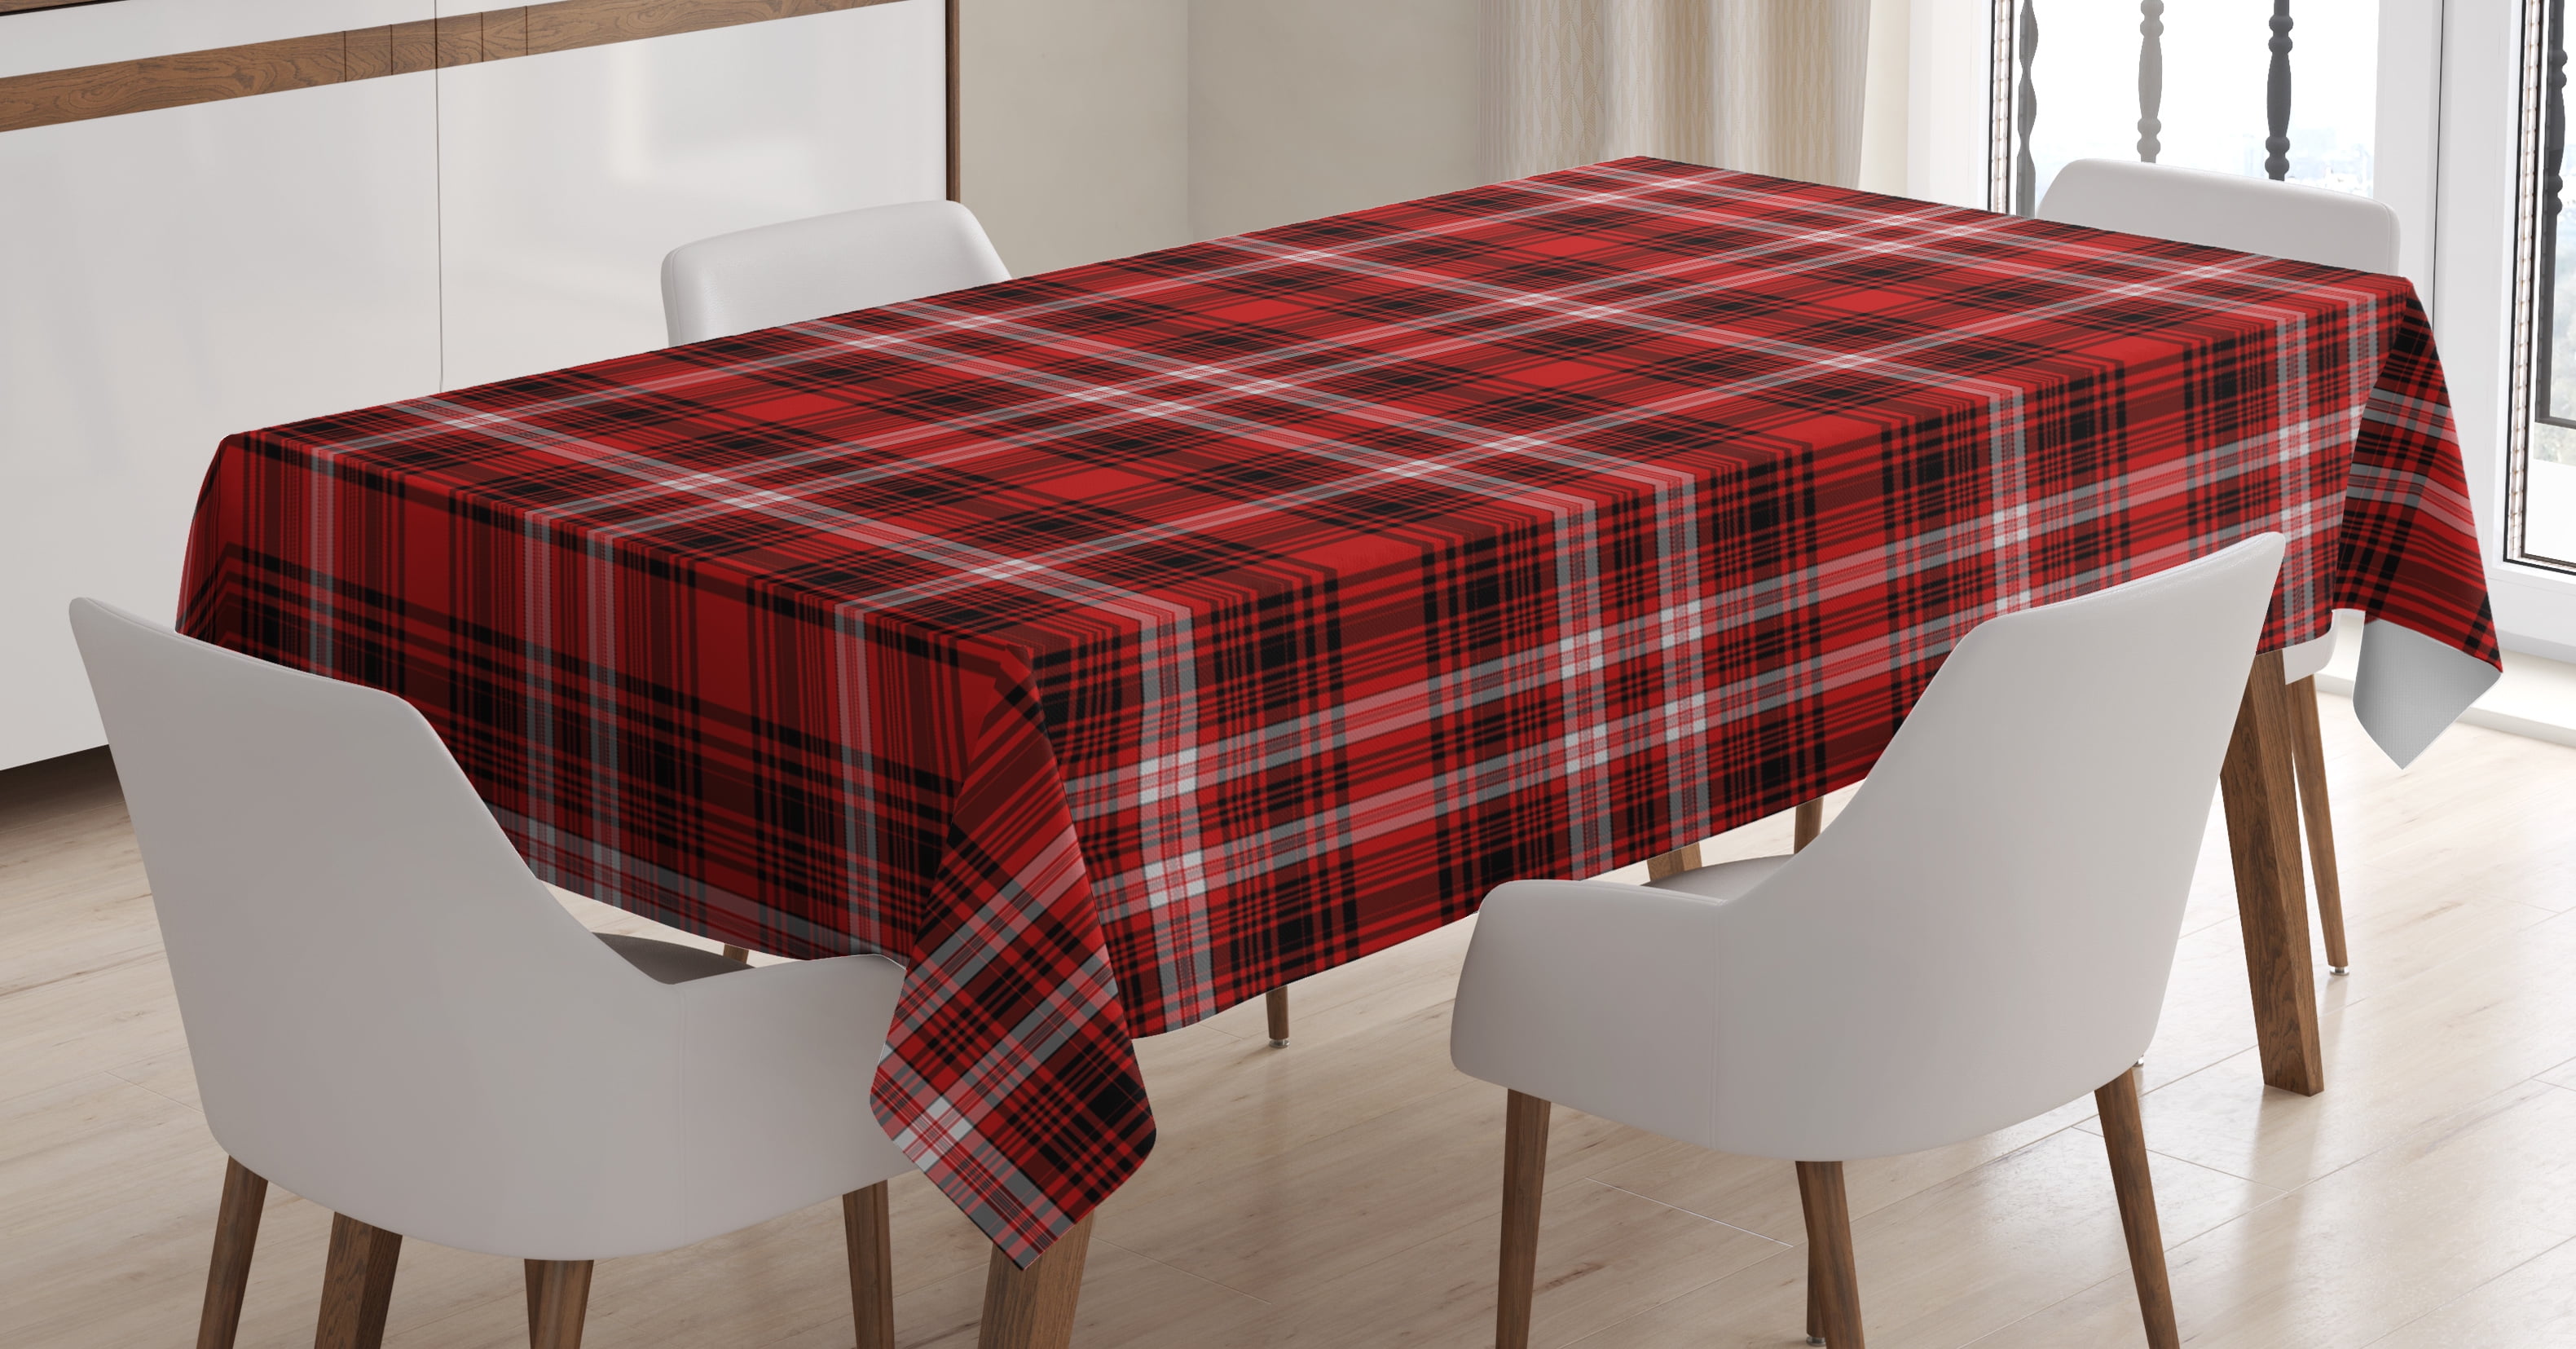 30 x 45 kitchen table cover tablecloth